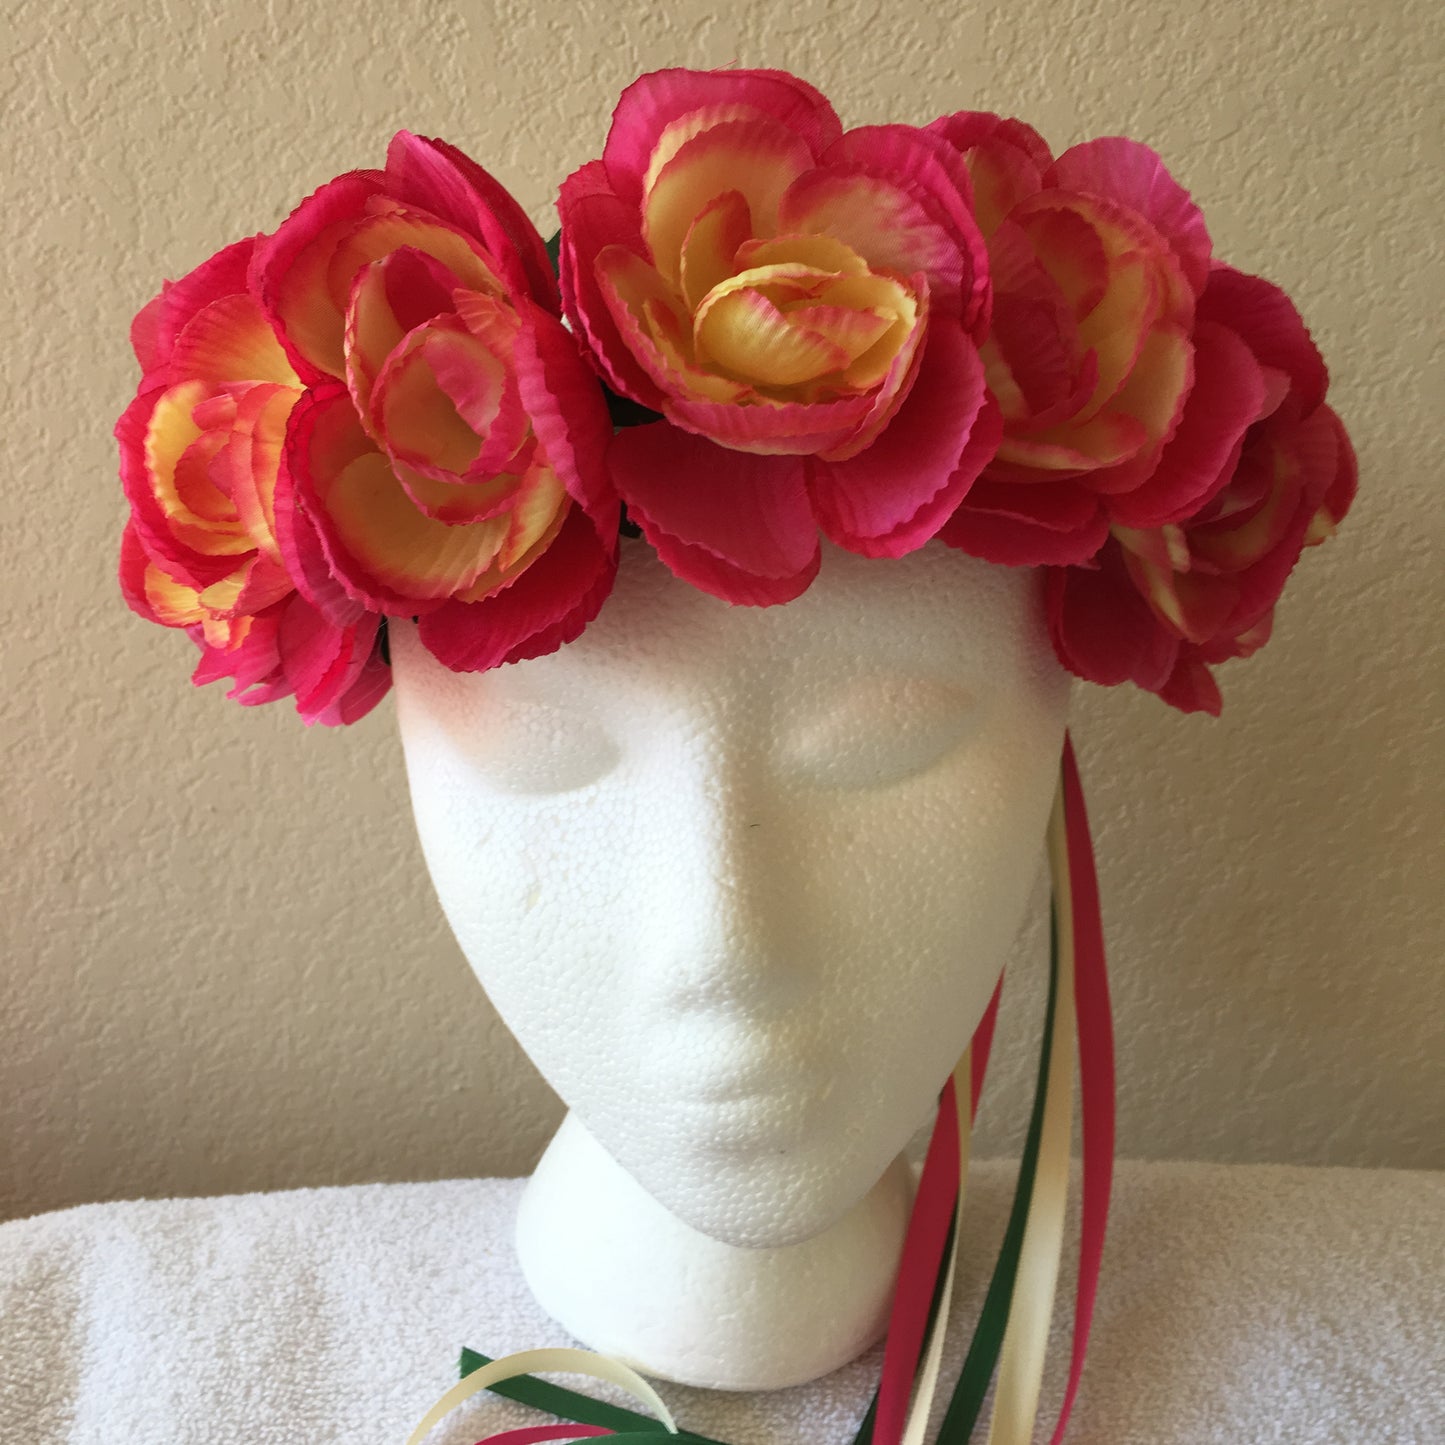 Medium Wreath - Hot pink to pale yellow flowers